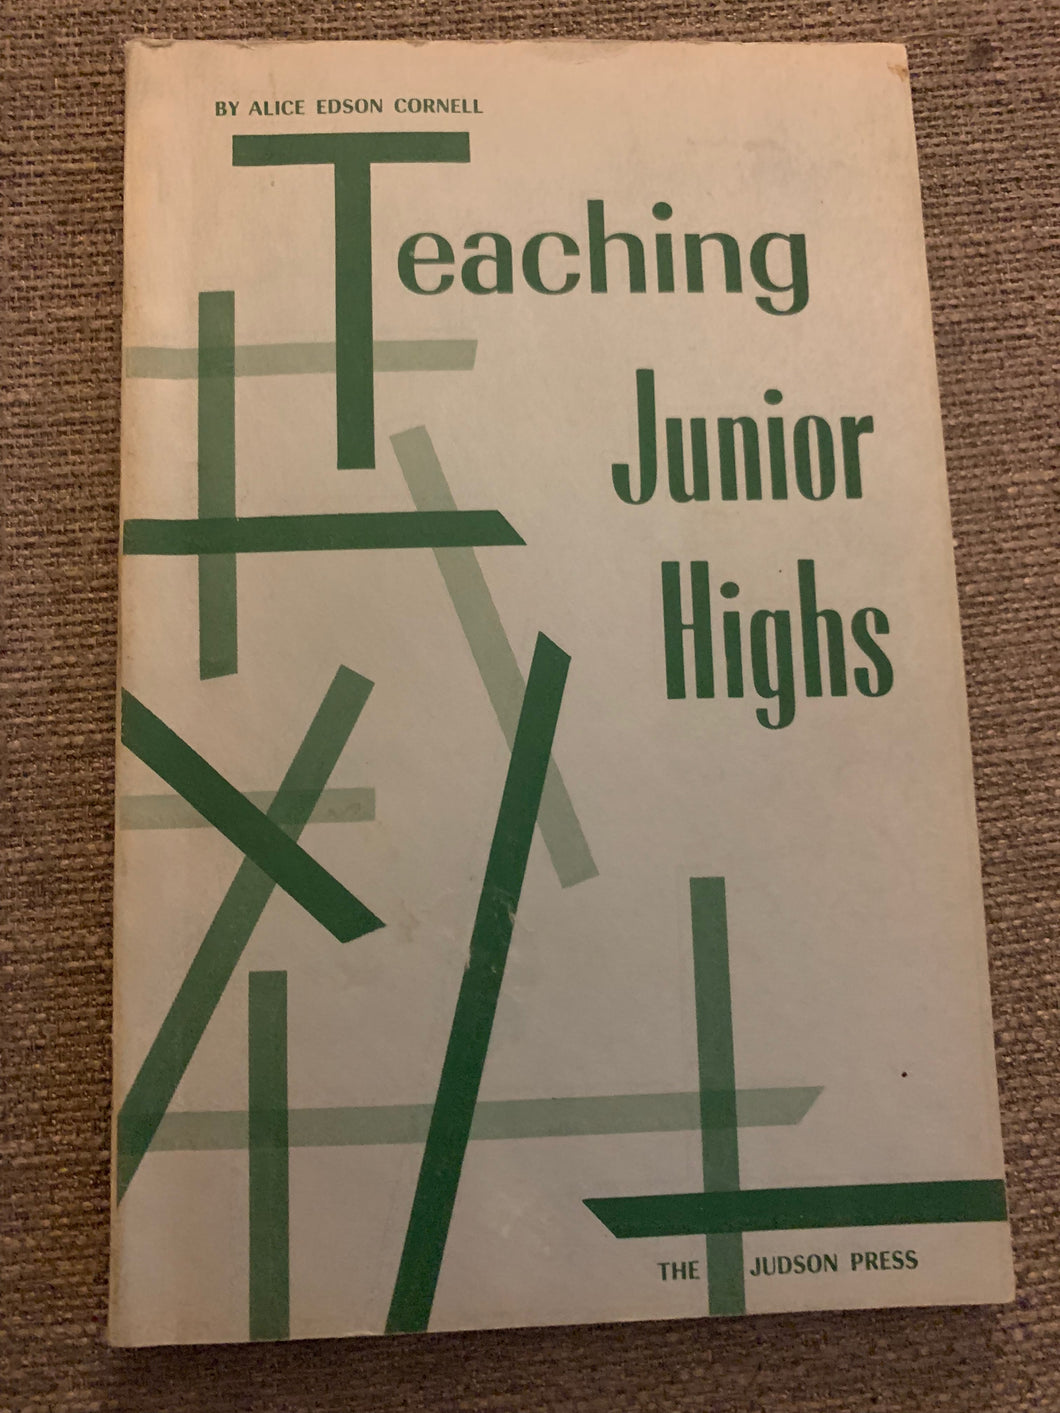 Teaching Junior Highs by Alice Edson Cornell